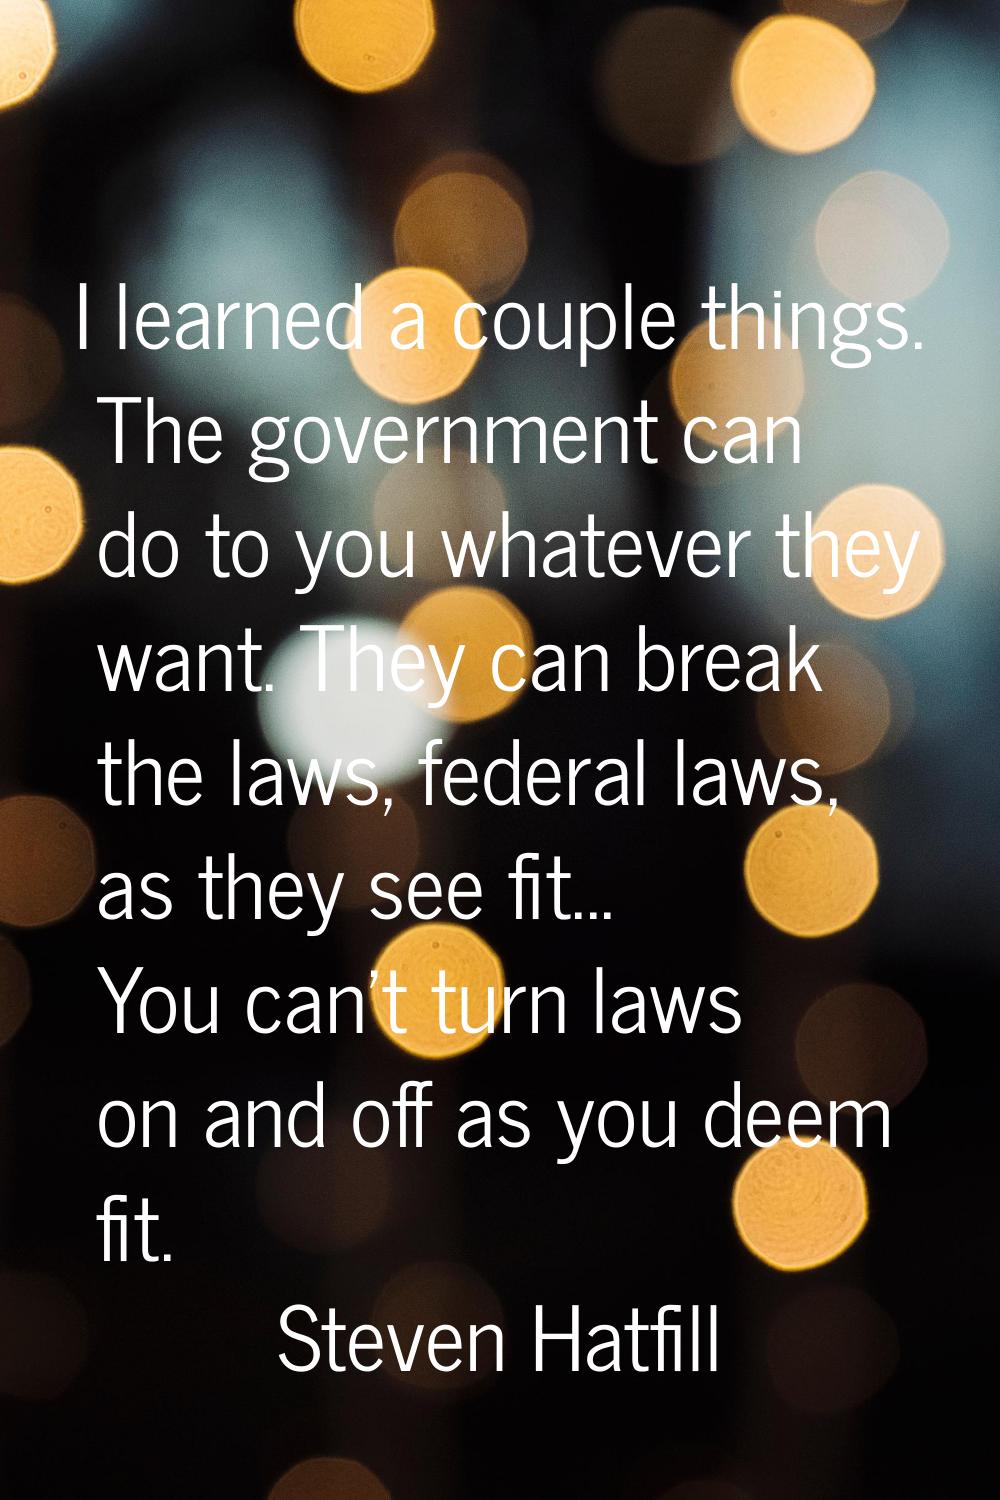 I learned a couple things. The government can do to you whatever they want. They can break the laws